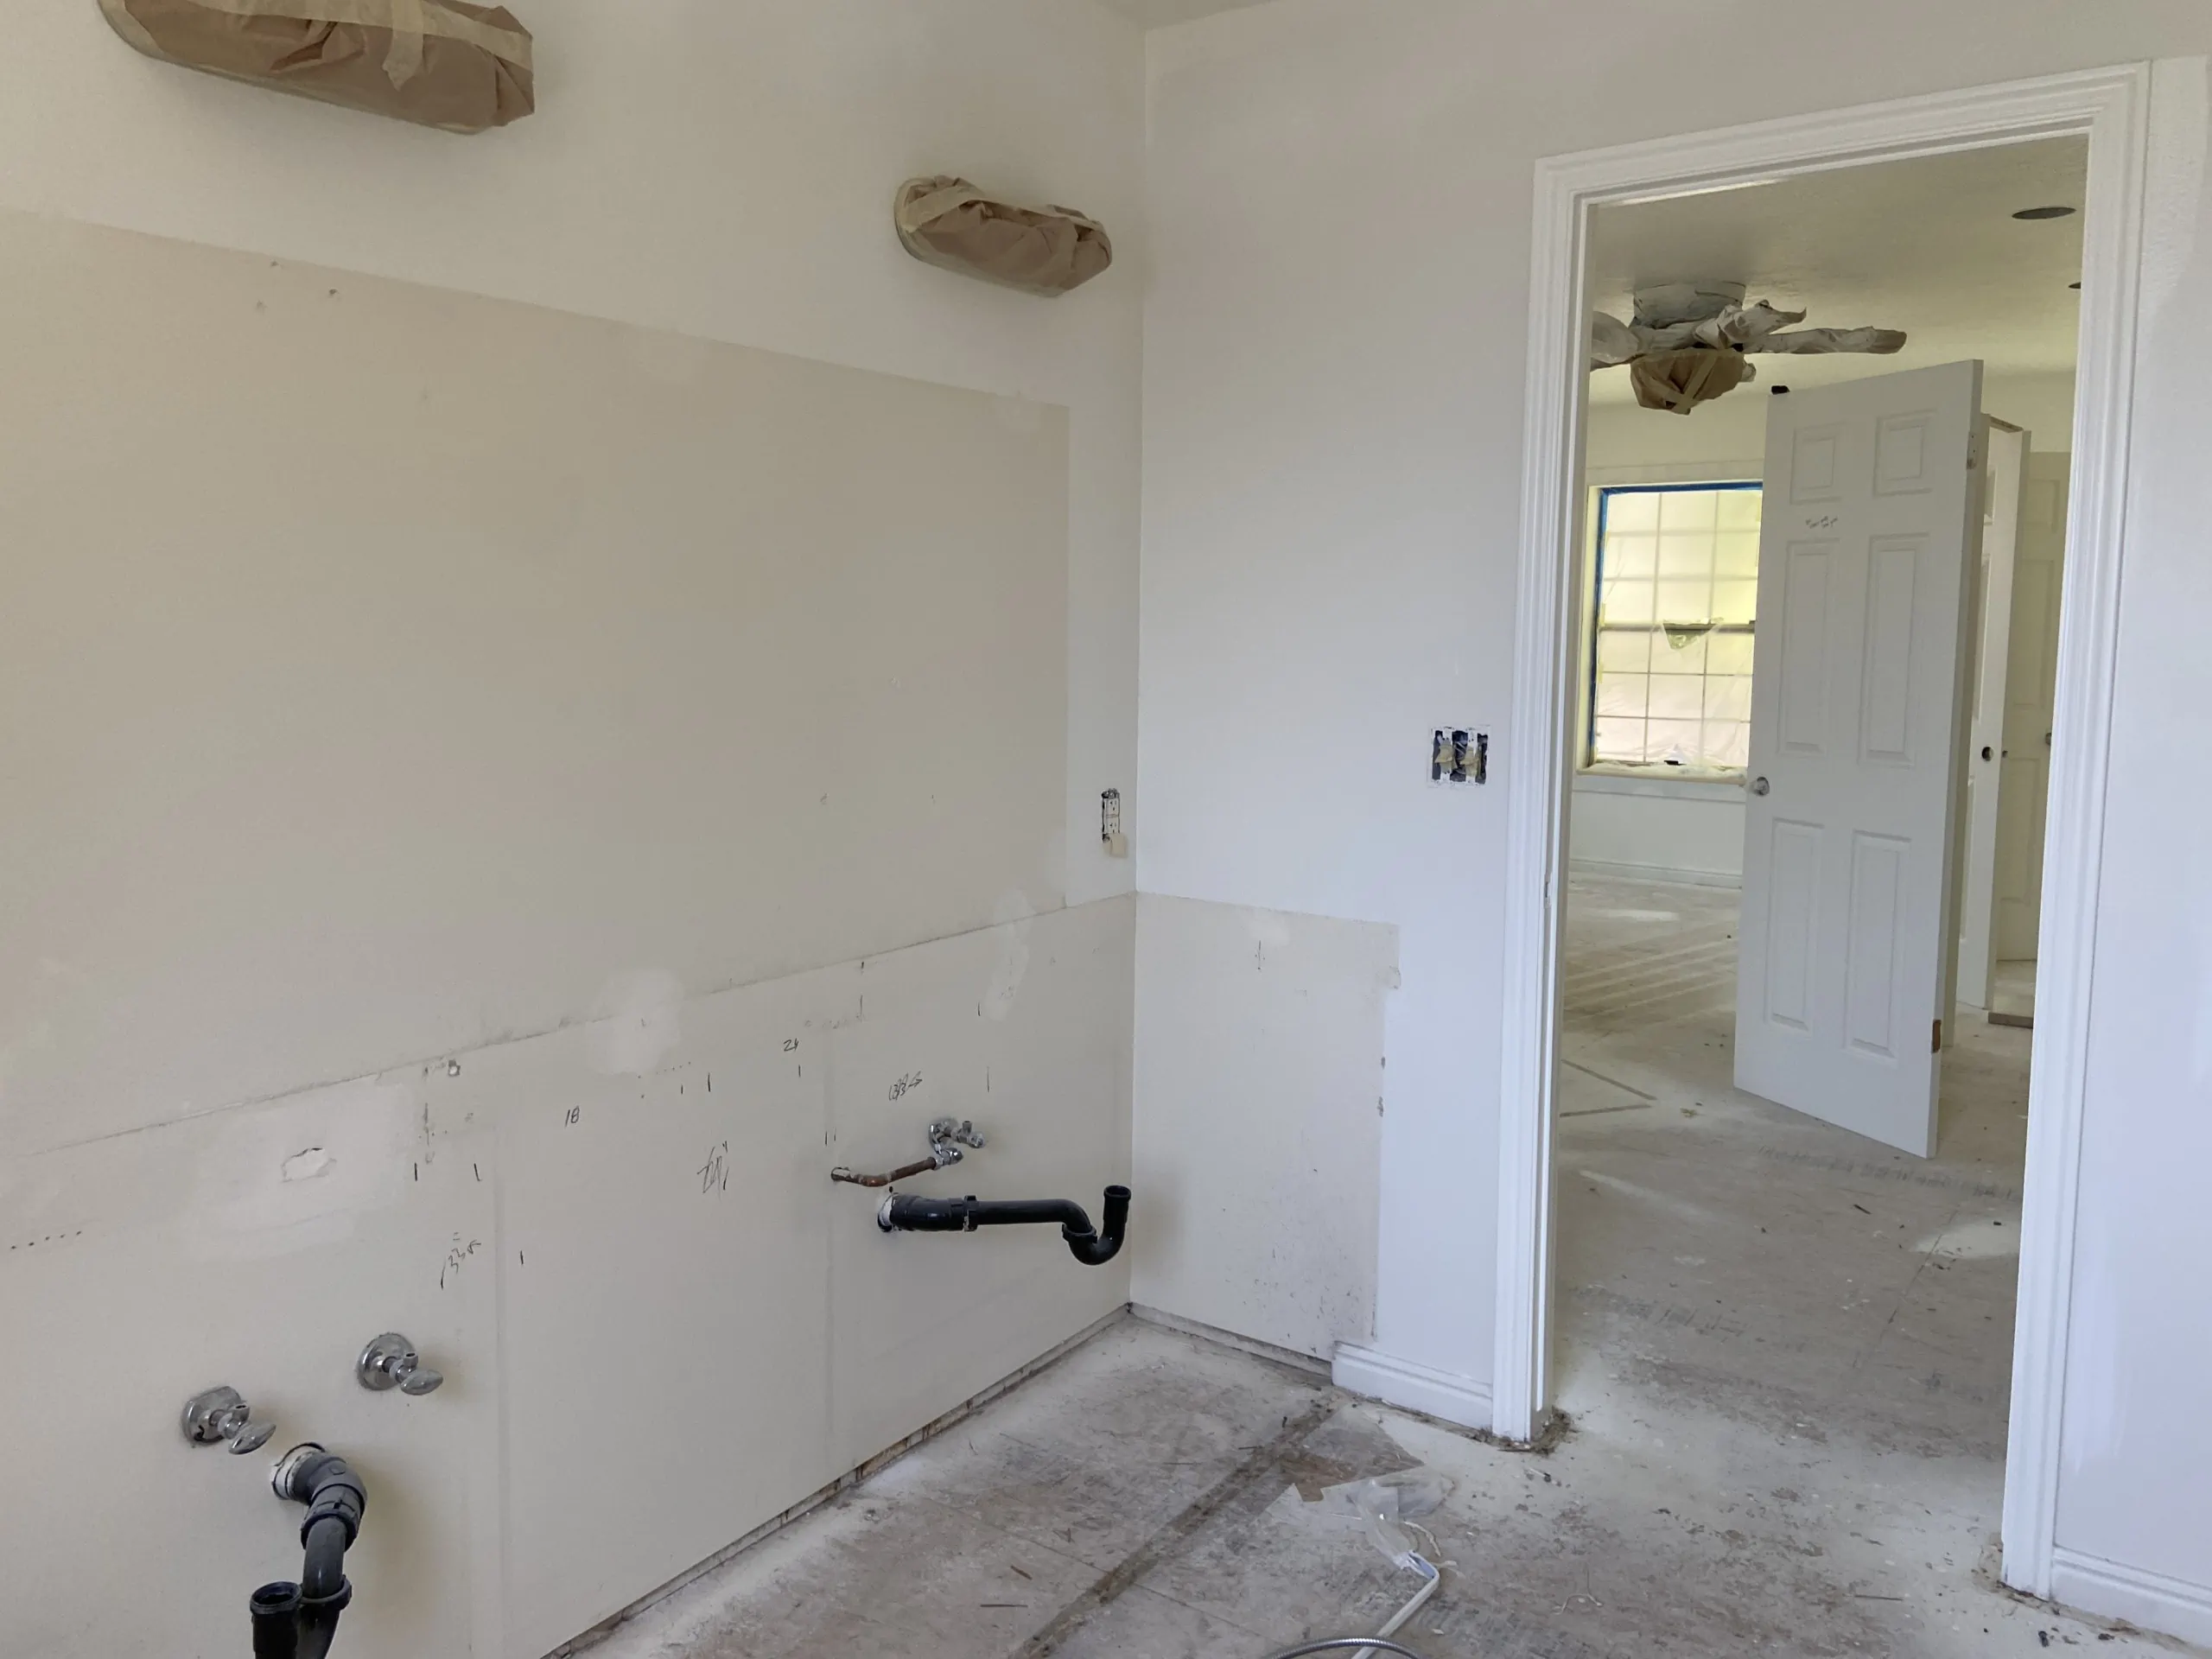 a blank, unfinished room with sheetrock walls and a dusty subfloor. There's a doorway that leads to another unfinished space in the image. One of the walls has mysterious plumbing coming out of it.